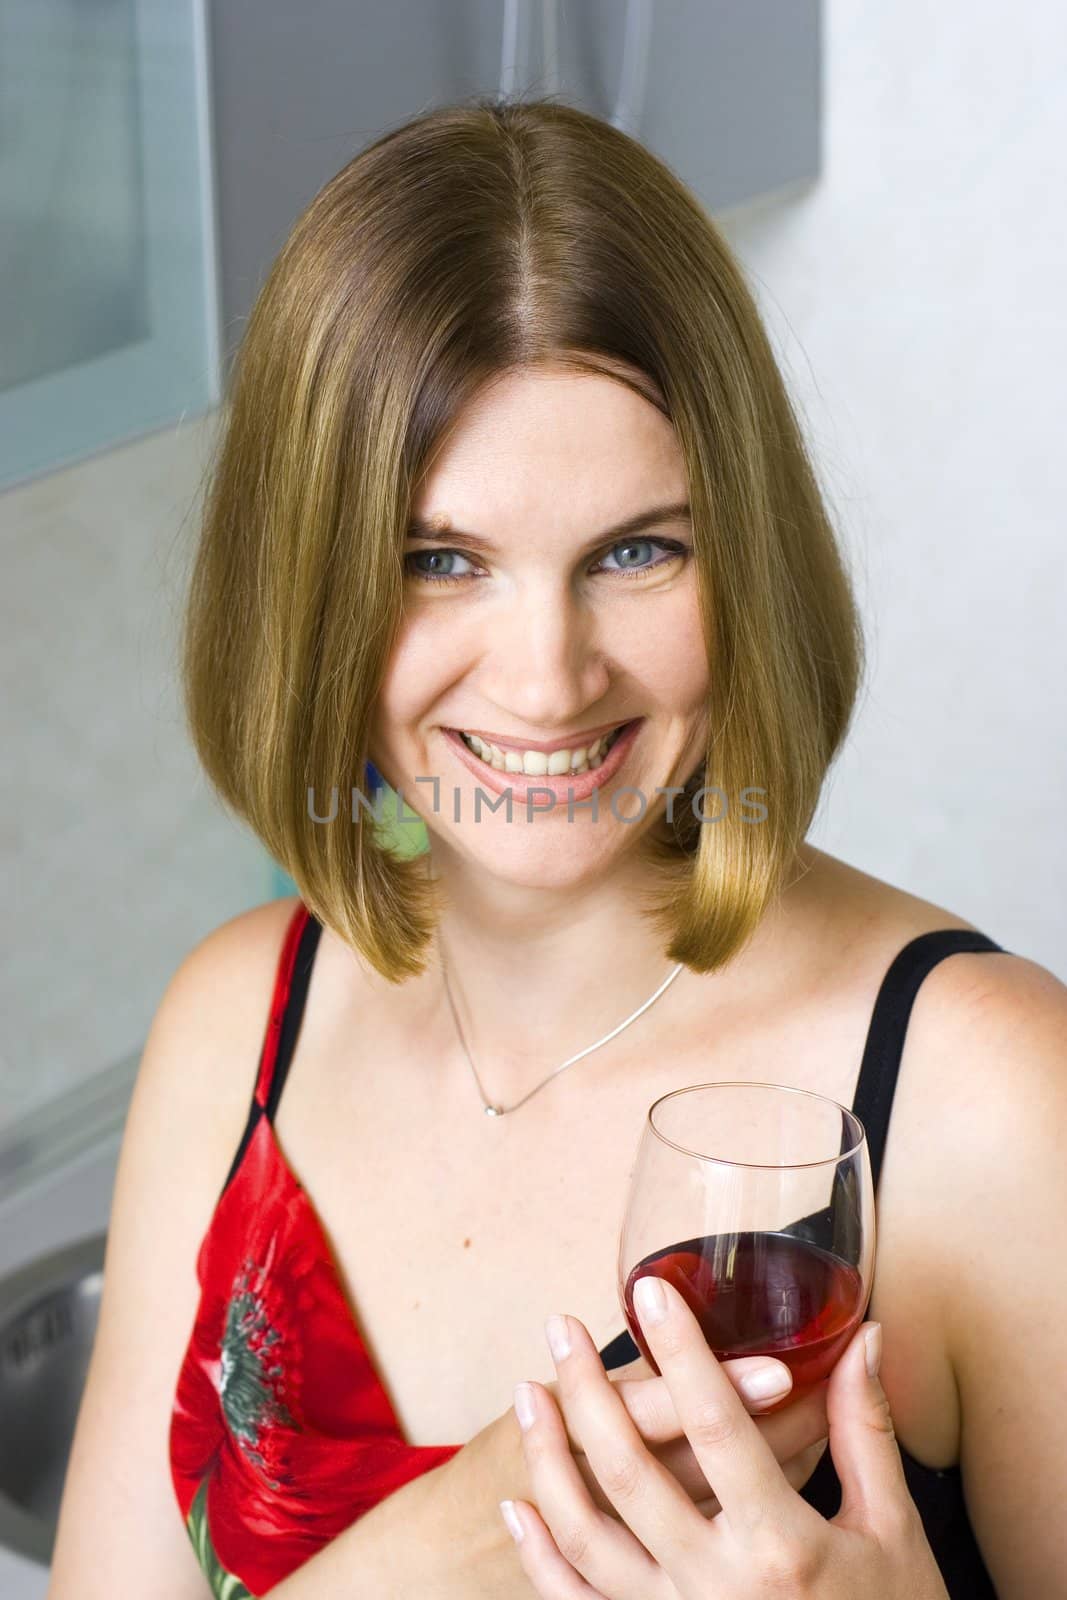 Young woman on kitchen witn red wine